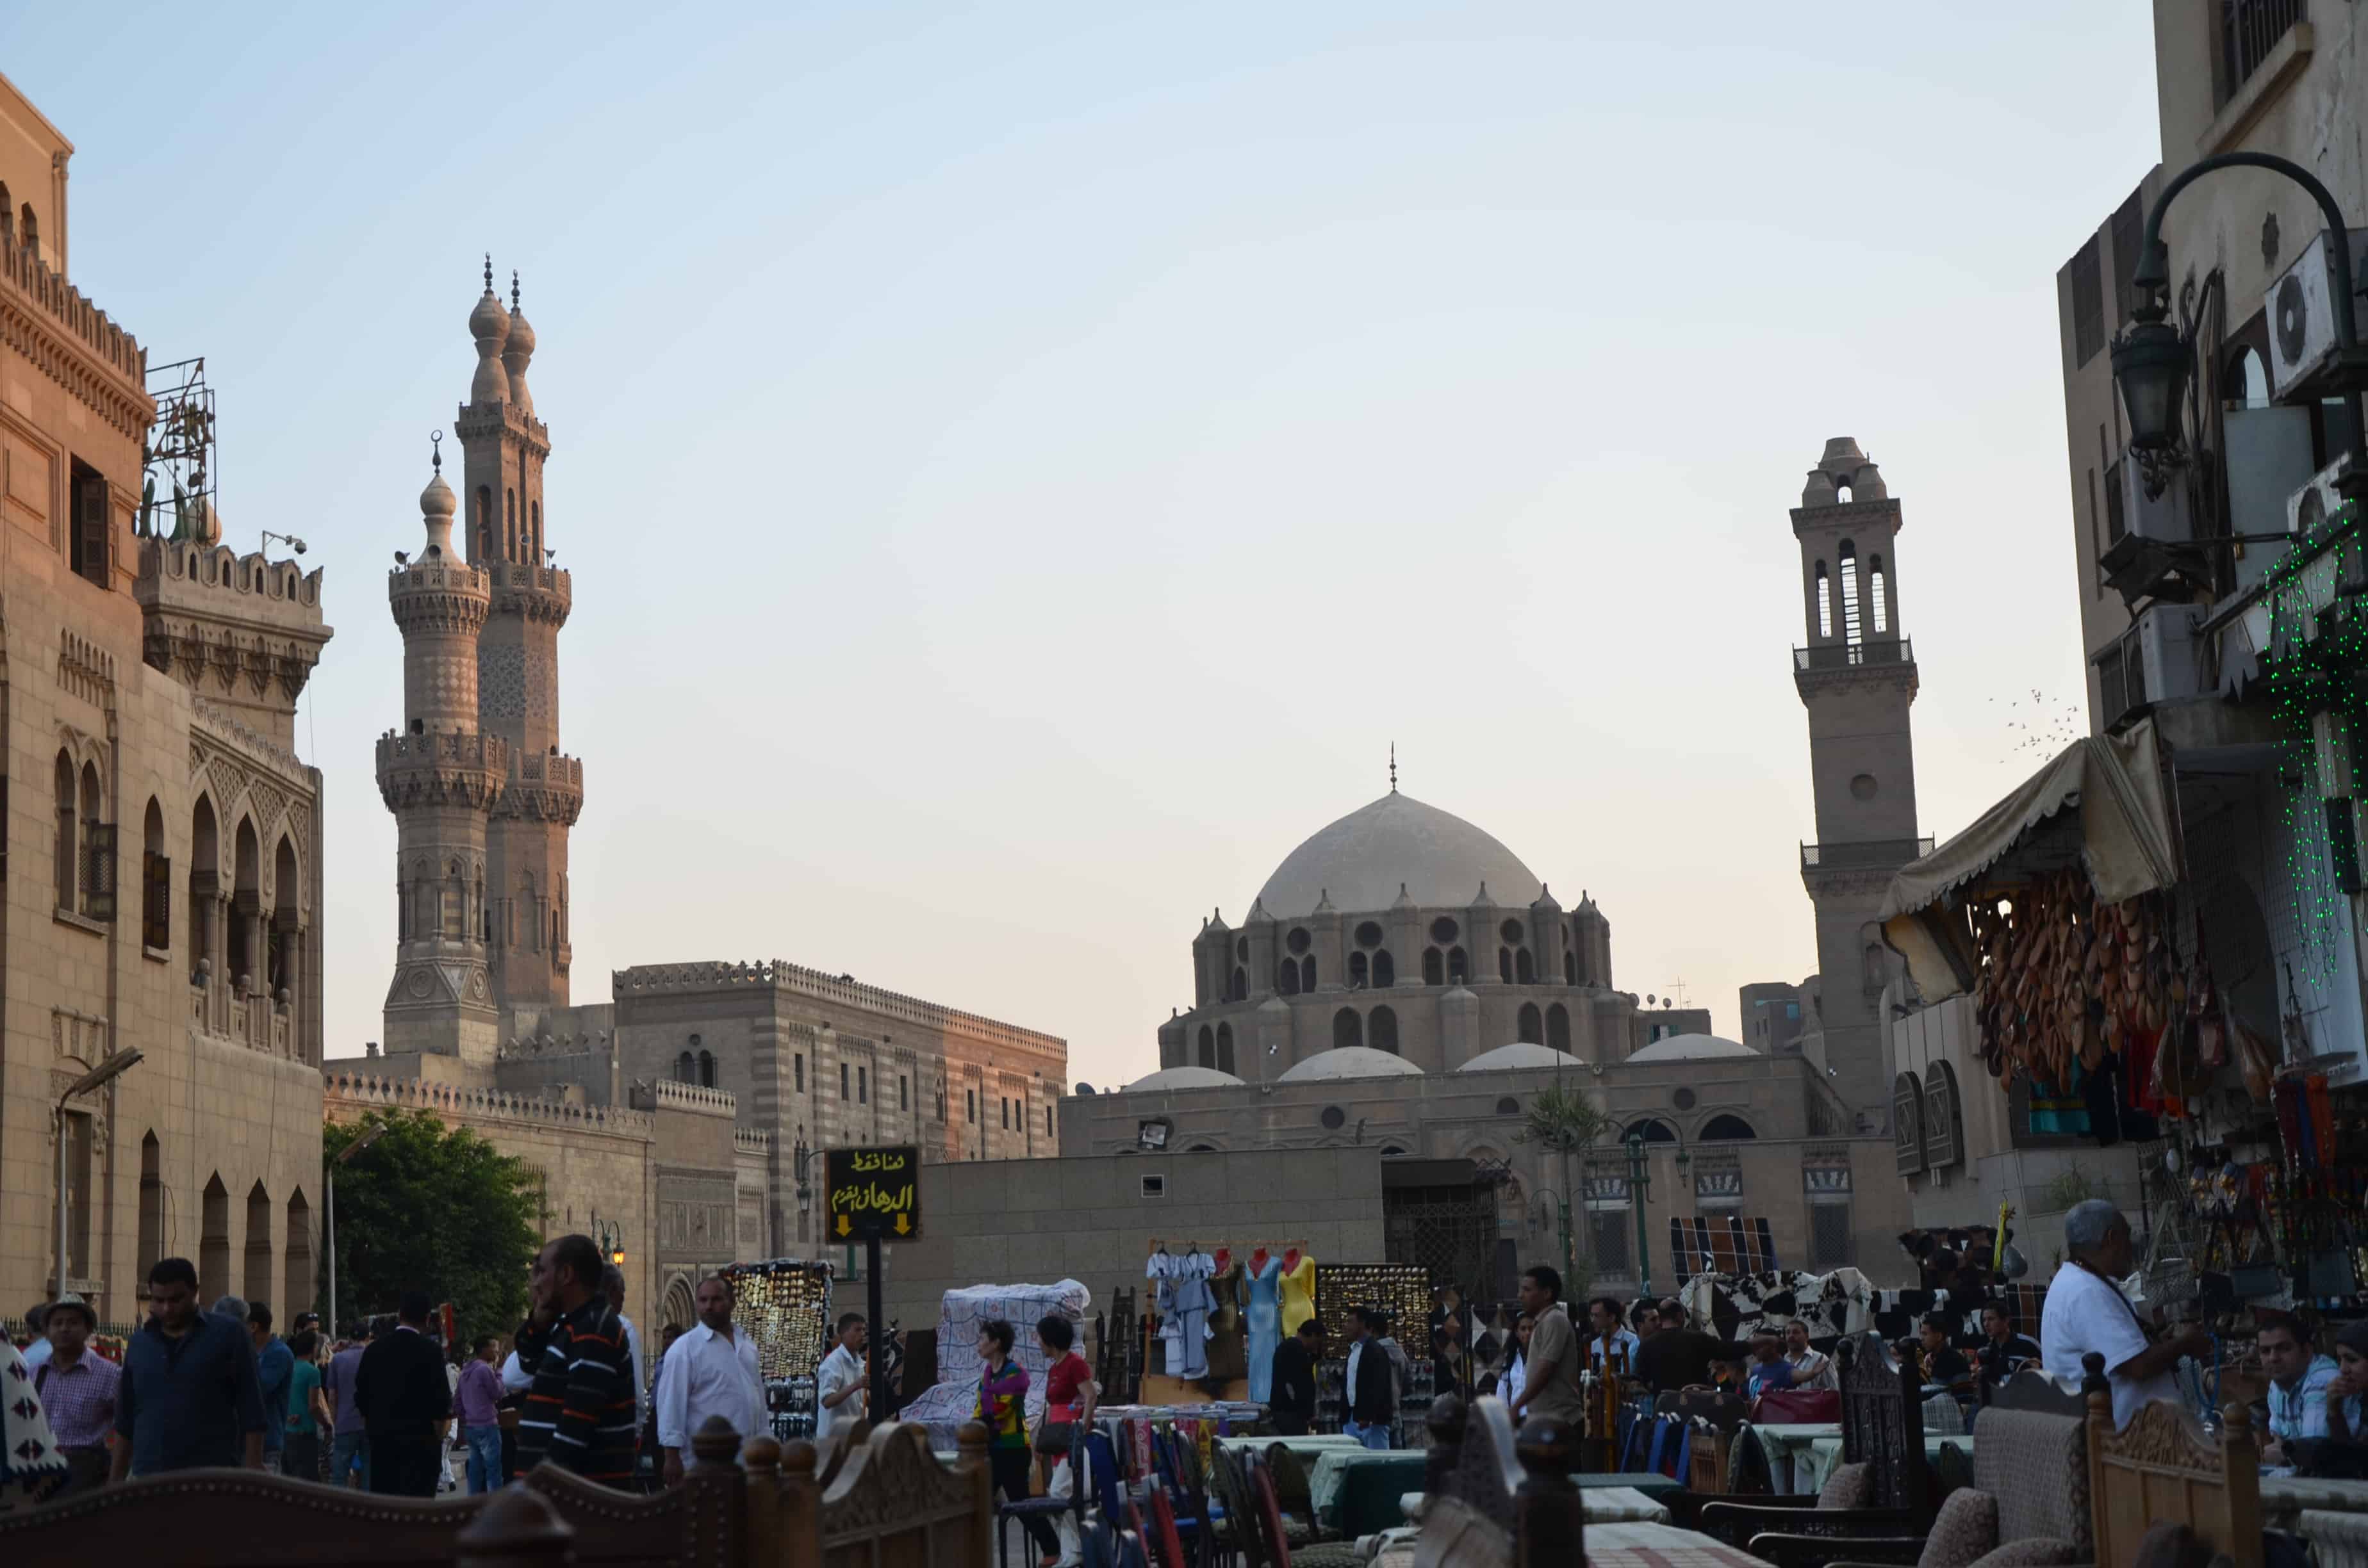 Al-Azhar Mosque (left) and Abu Dahab Mosque (right) in Cairo, Egypt